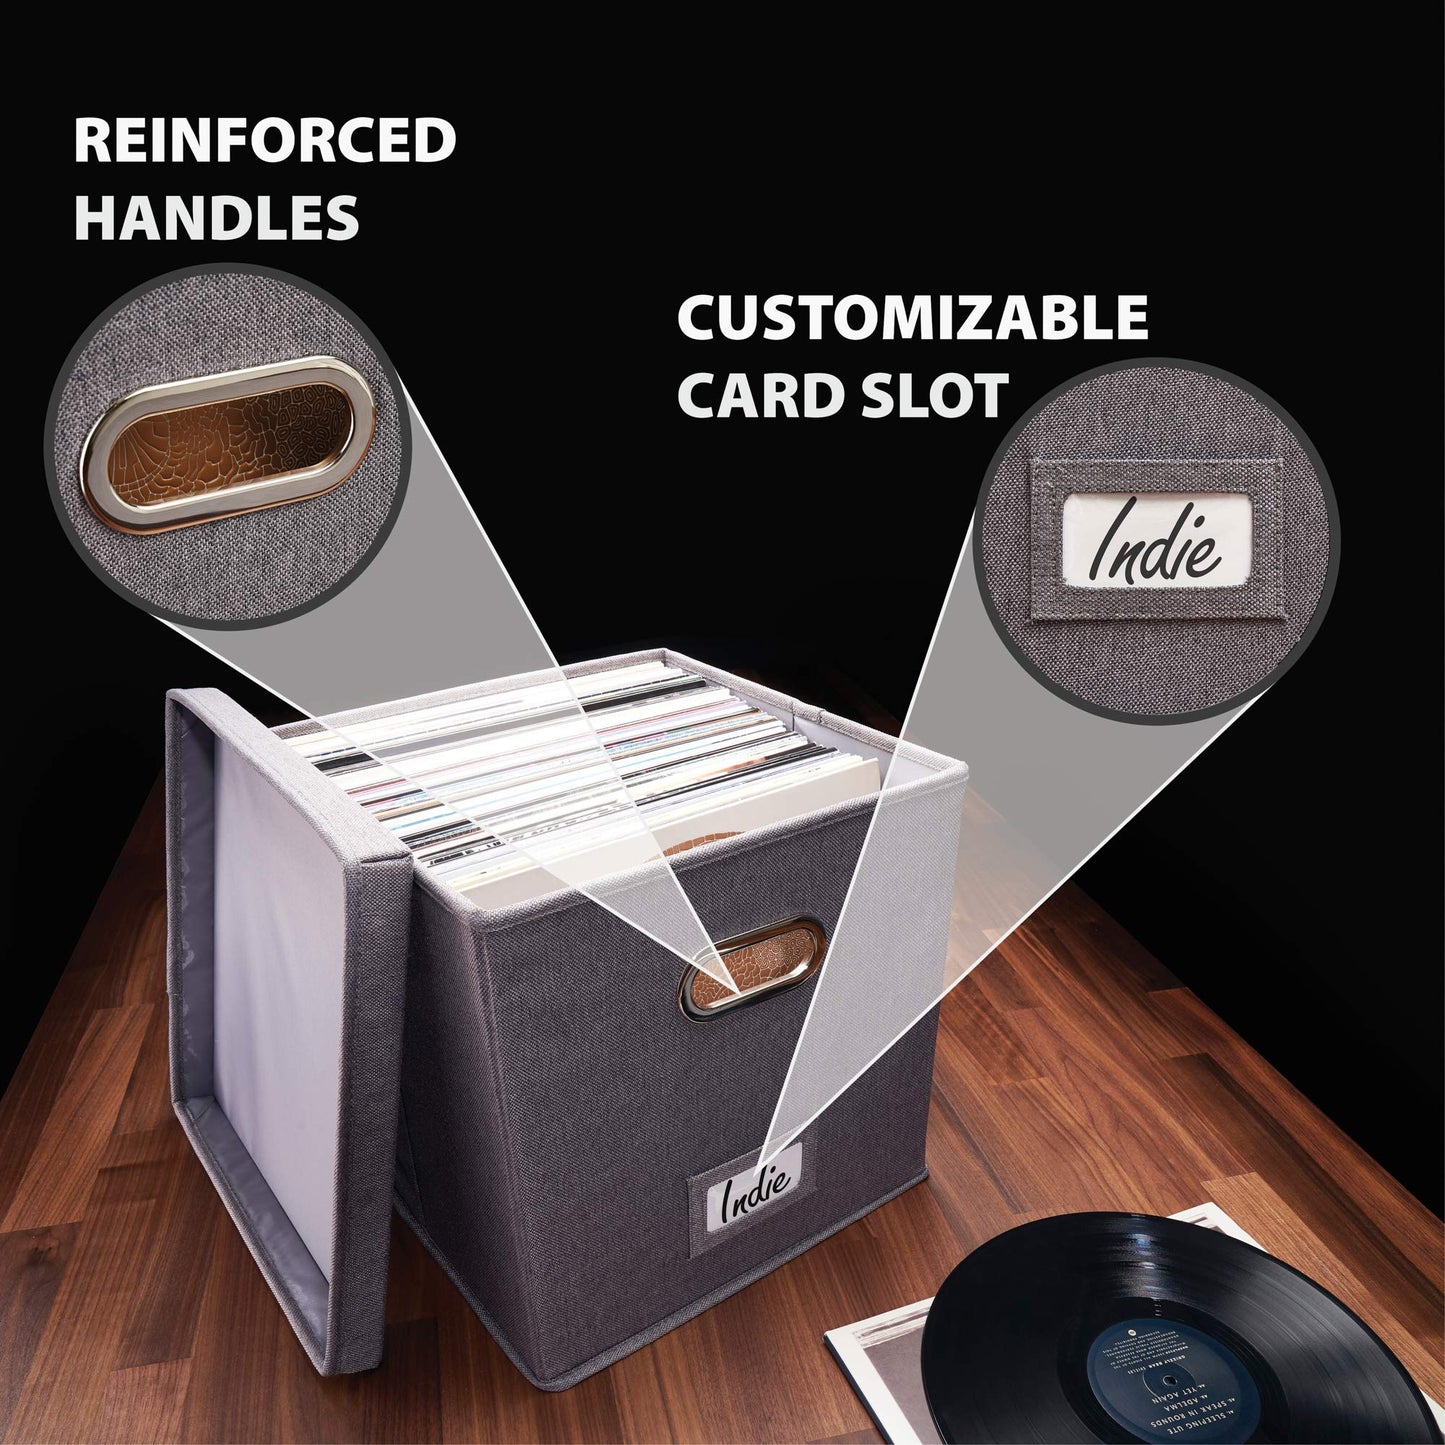 ZICOTO Decorative Vinyl Record Storage Box for 50+ Single Records - Sturdy and Easy to Carry LP Holder with Lid - The Perfect Storage Crate for Your Valuable Album Collection